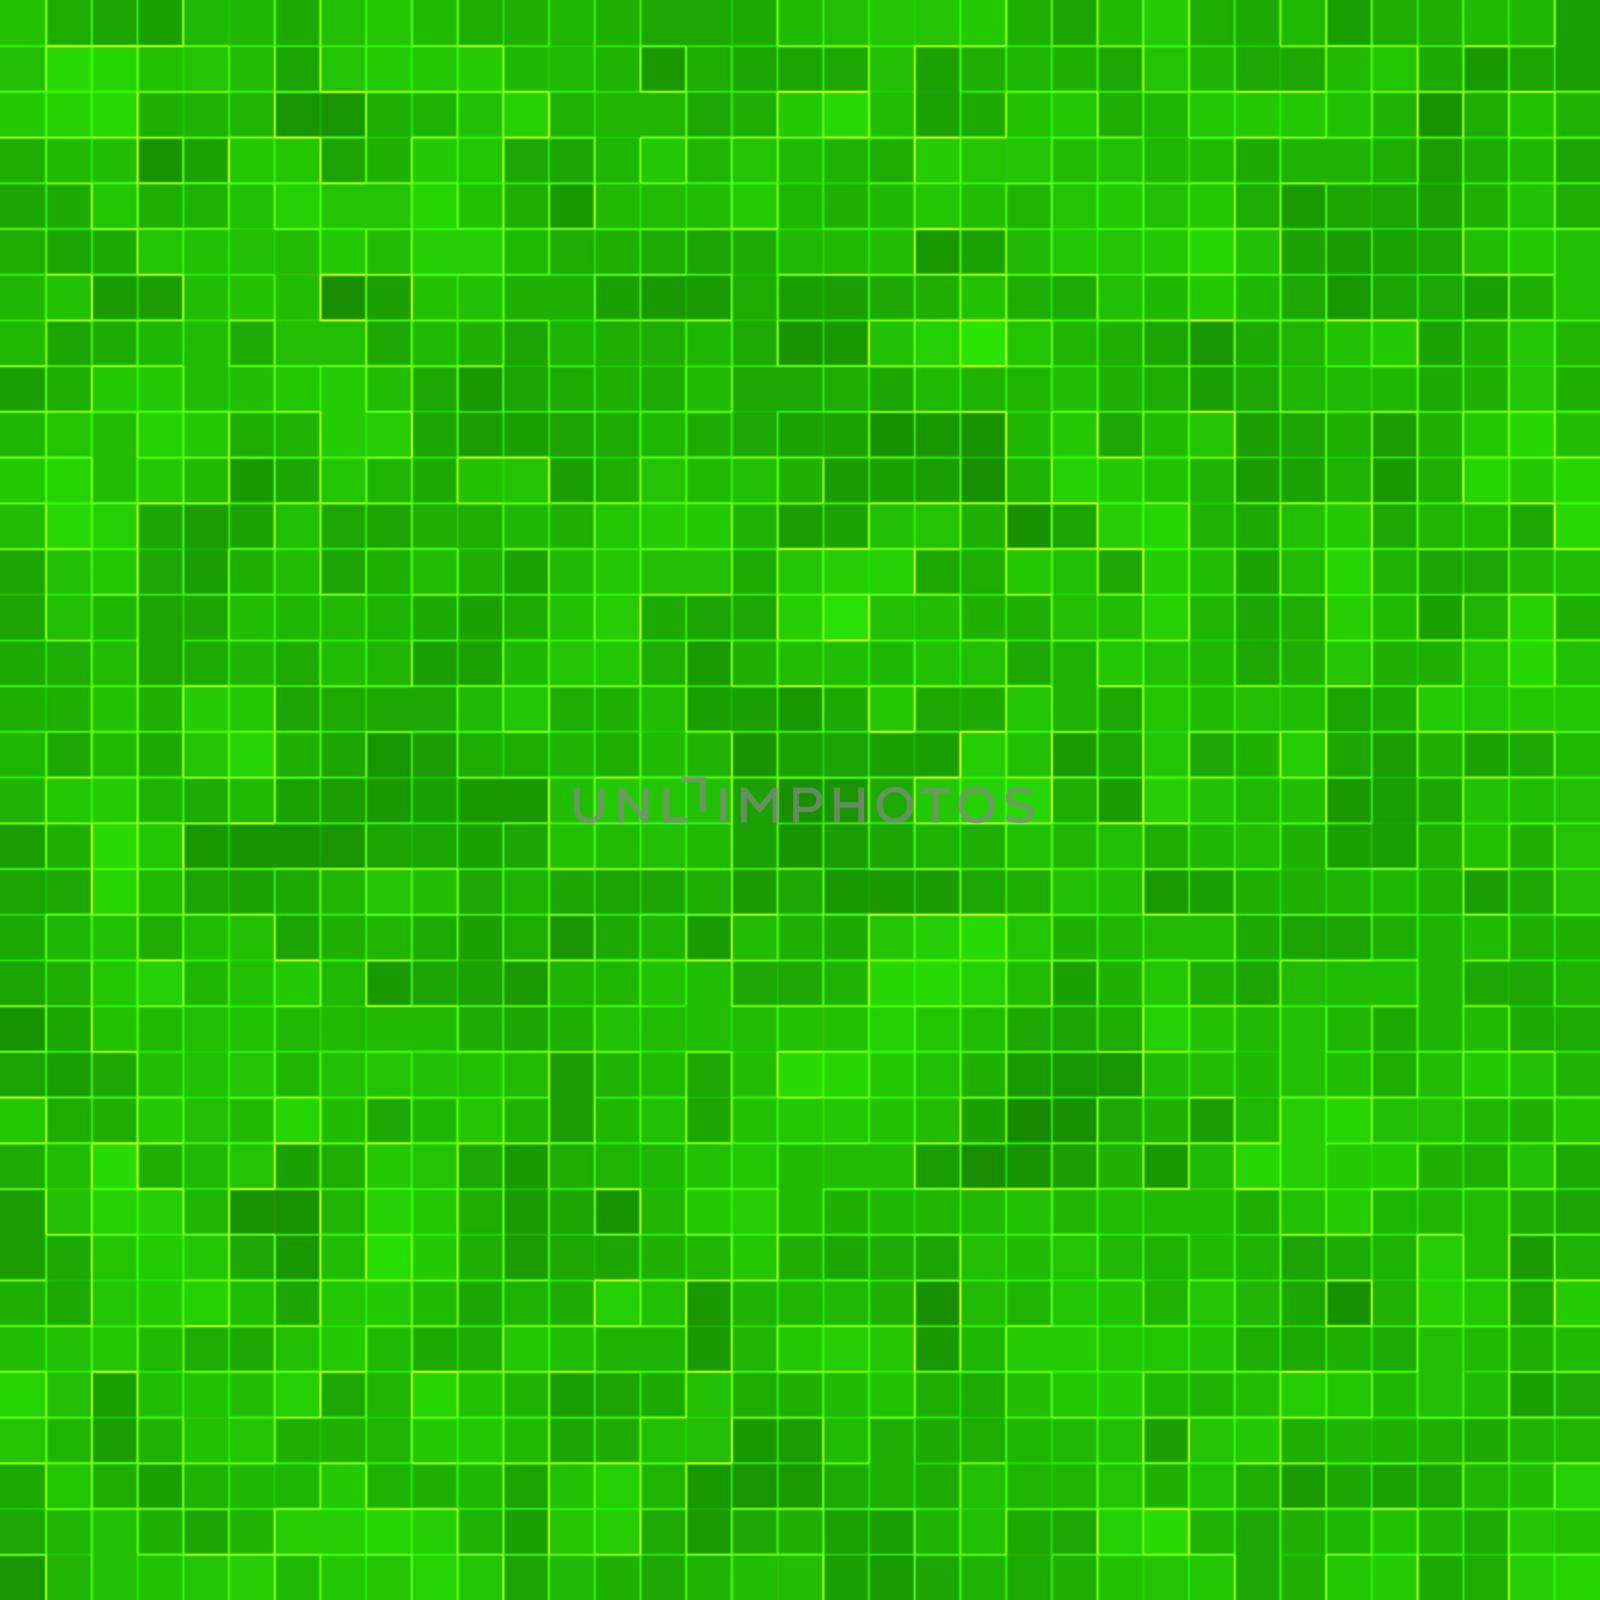 Abstract bright green square pixel tile mosaic wall background and texture